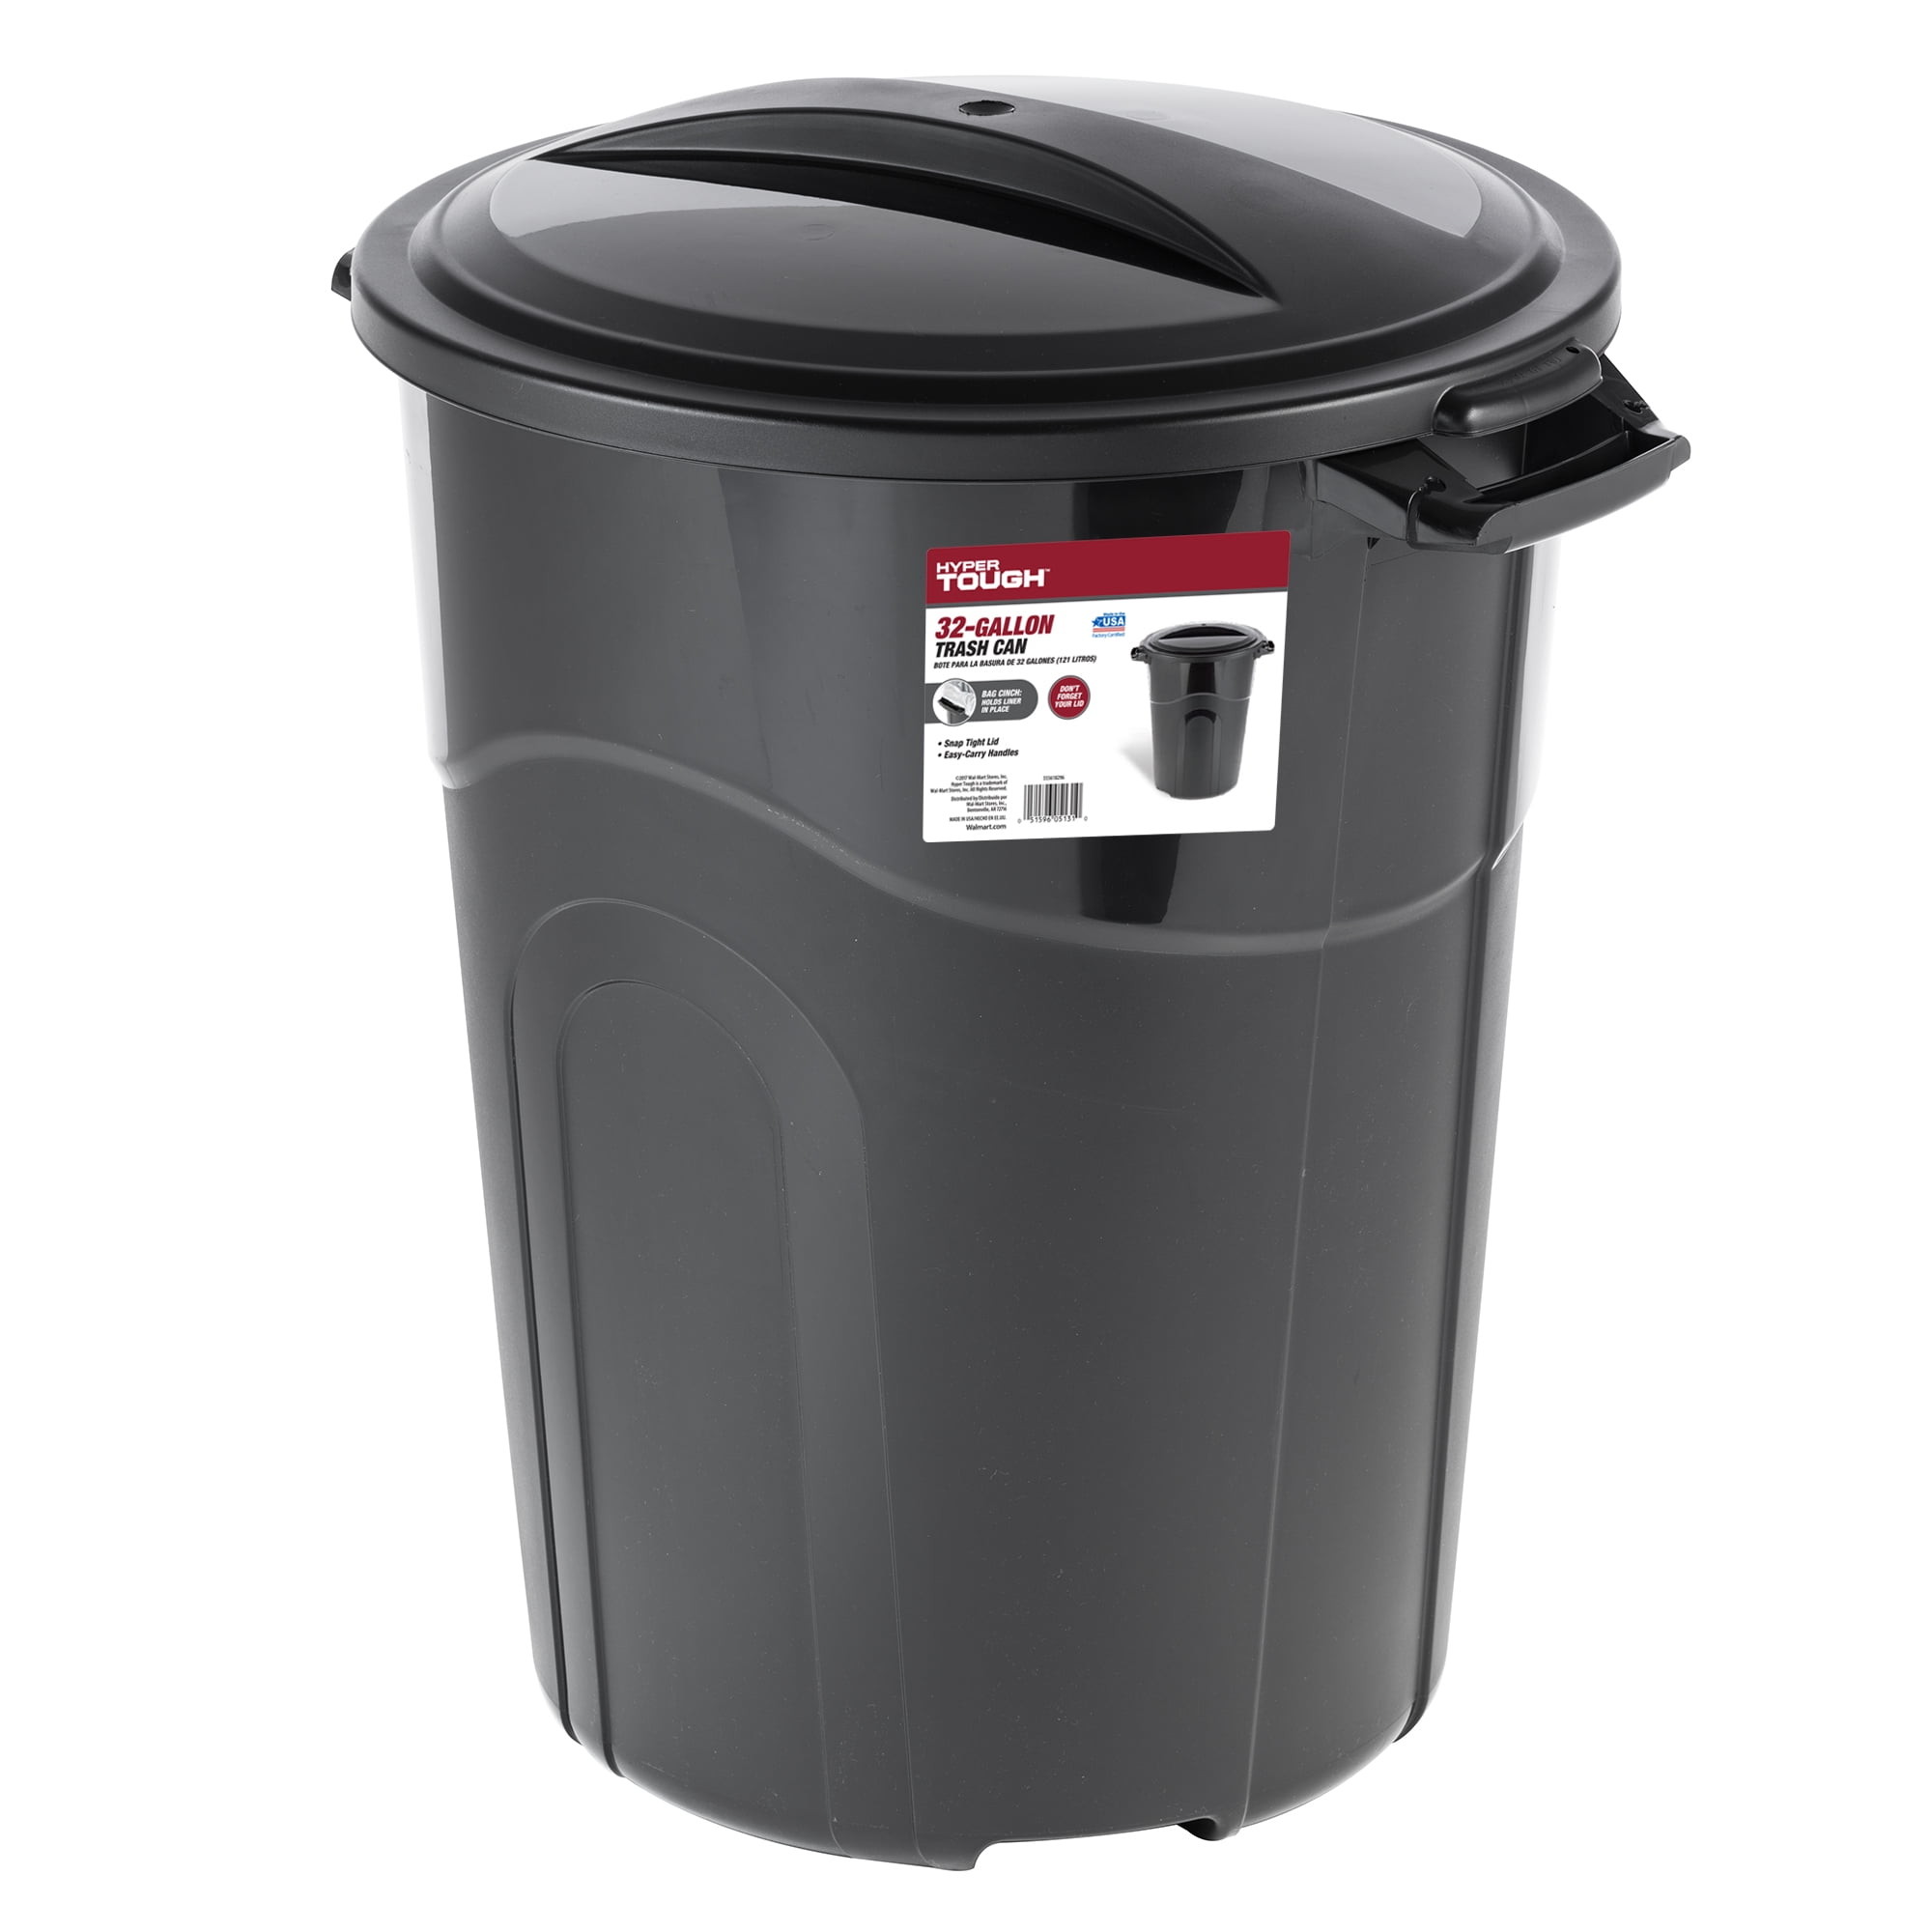 Outdoor Garbage Cans With Locking Lids And Wheels Black Wide Handle New 32 Gal 